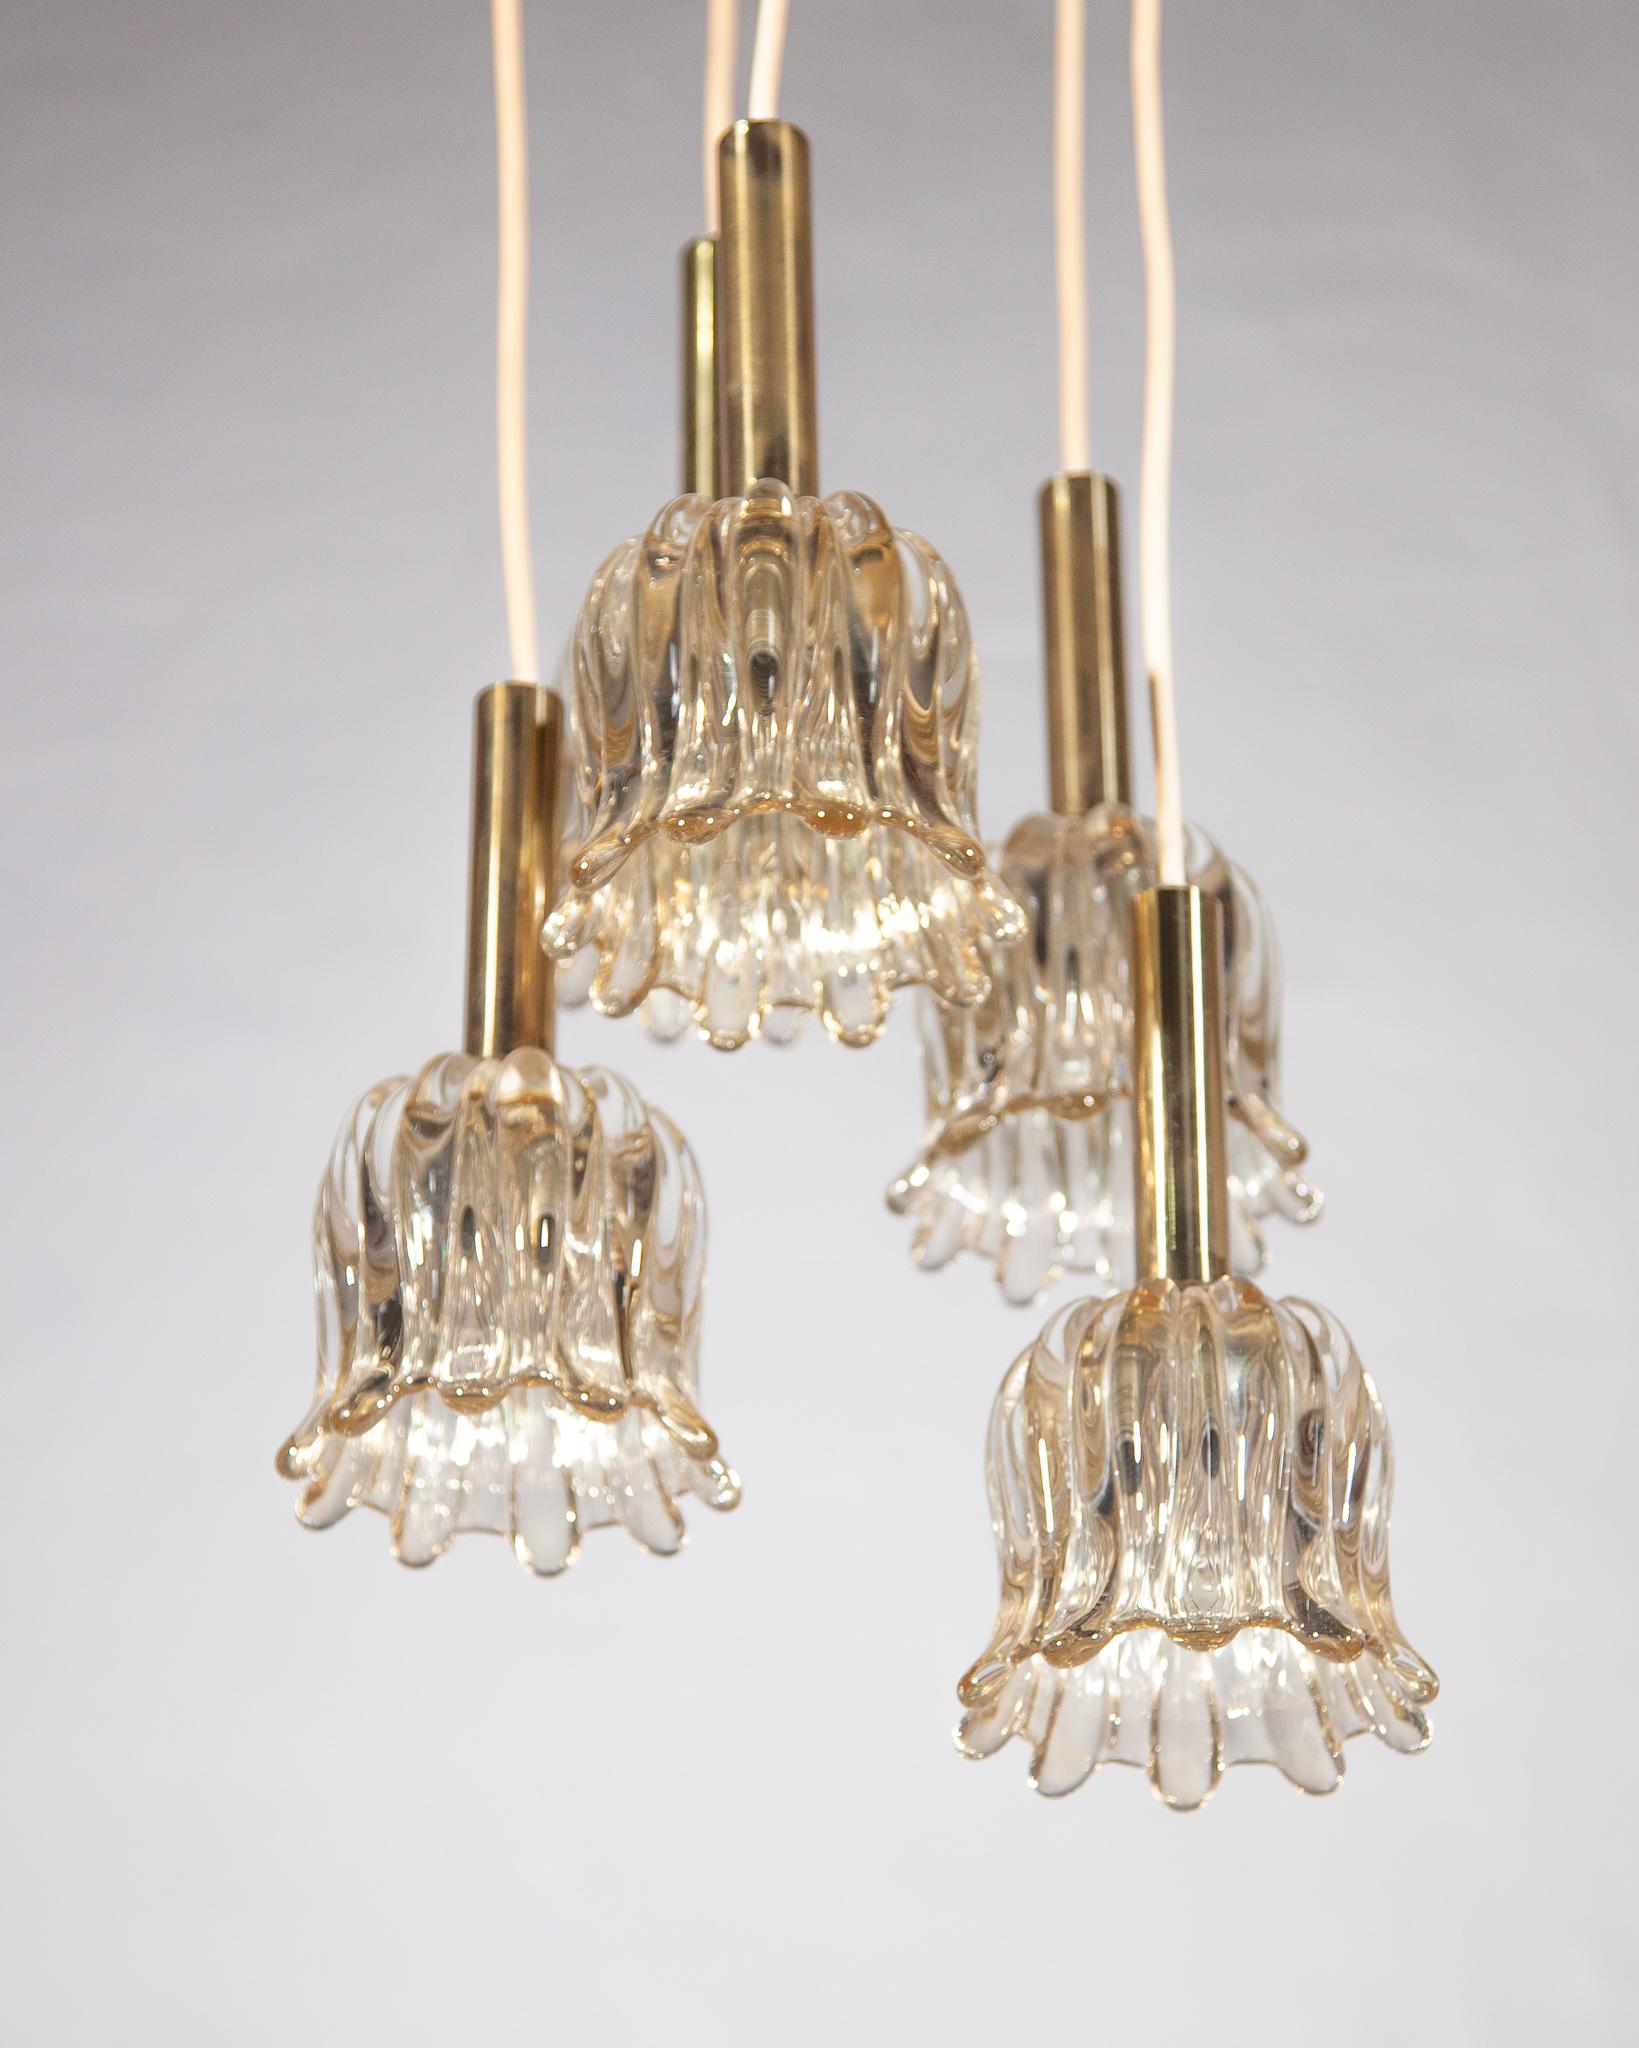 Cascade five flower crystal glass, brass cascade light chandelier made by Kaiser Leuchten, Germany, circa 1970-1979.
This Kaiser-Leuchten cascade is a variation of the designs of lightings with opal textured flower molded glass from the early 70s.